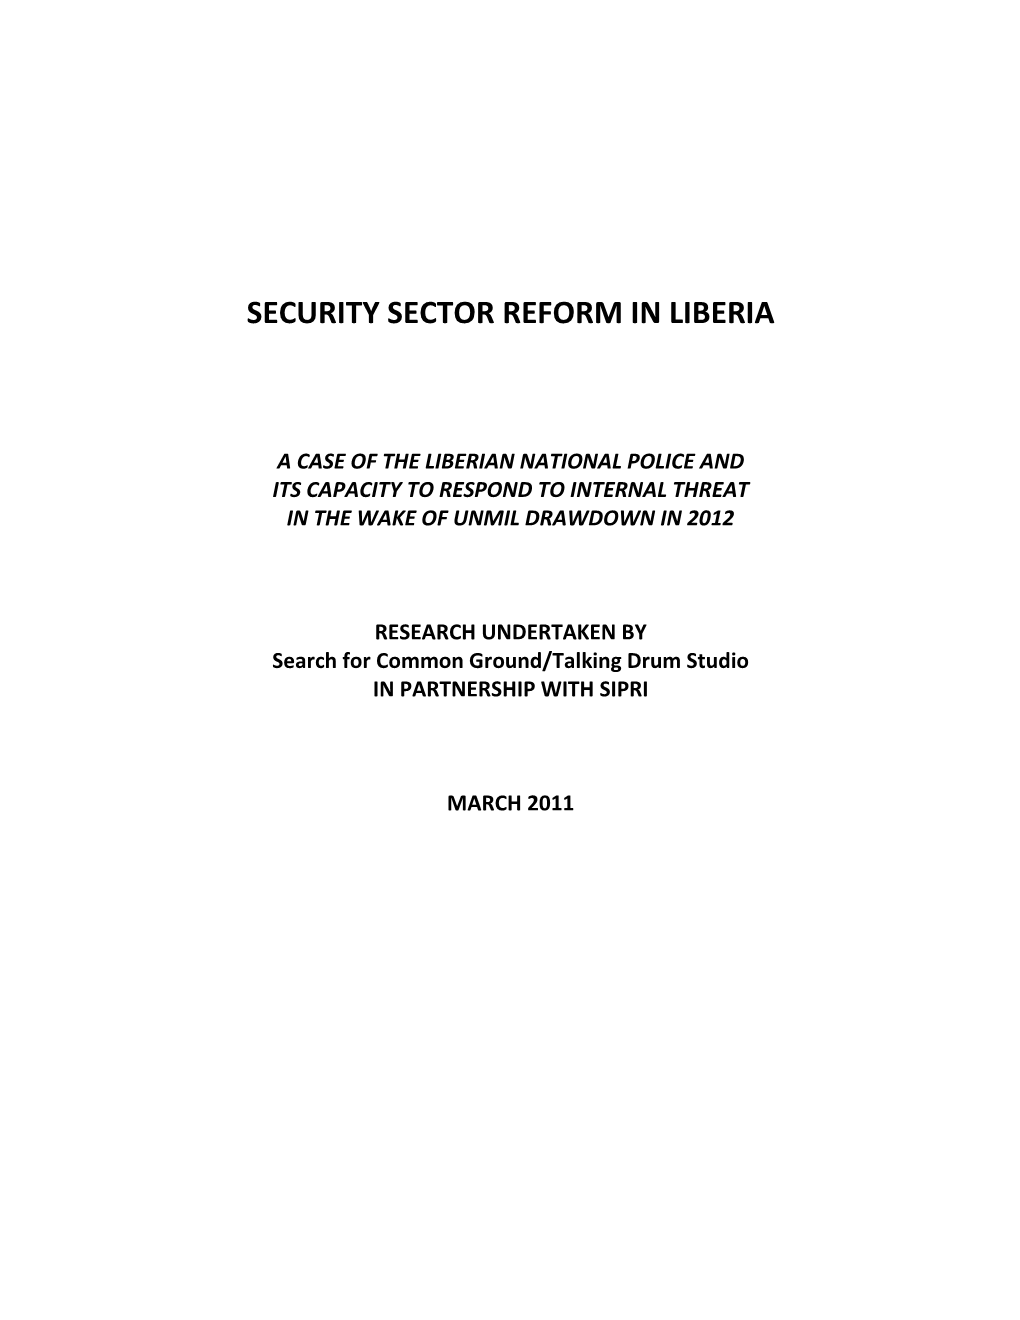 Security Sector Reform in Liberia